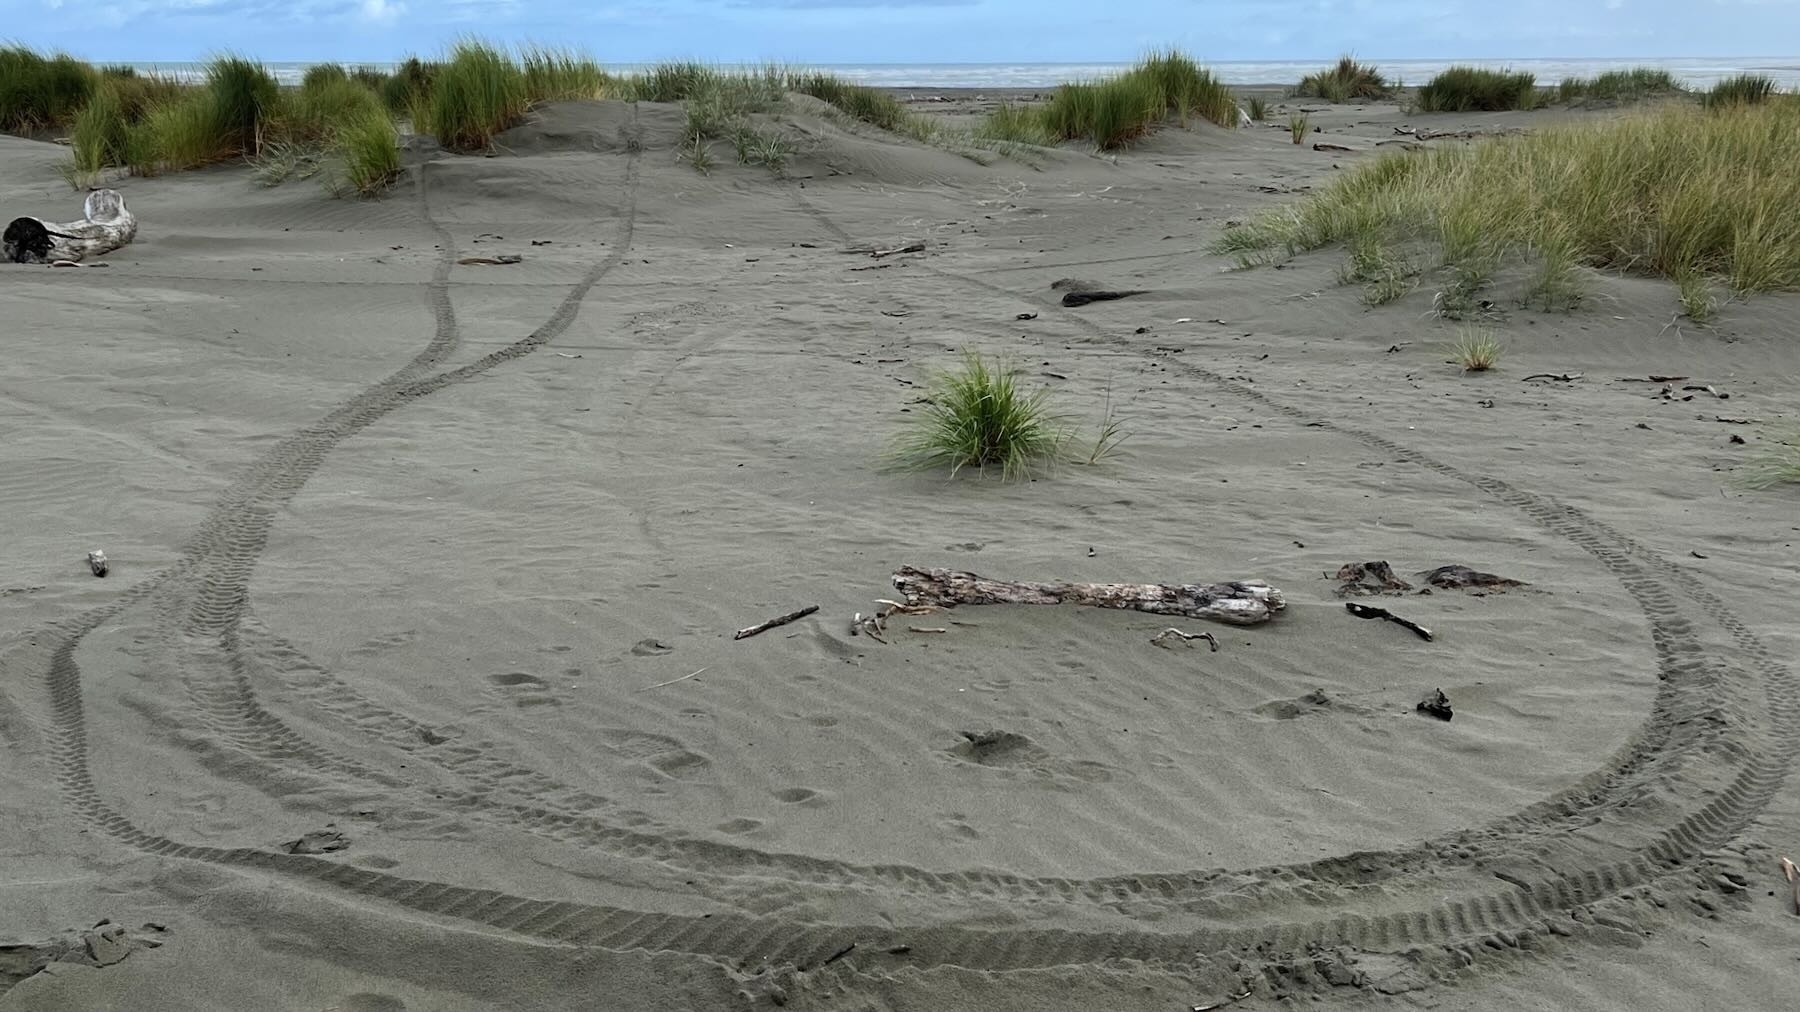 Waikawa Beach, 02 April 2023, some of the many fresh vehicle tracks through the incipient dunes and bird nesting areas. (When in season).